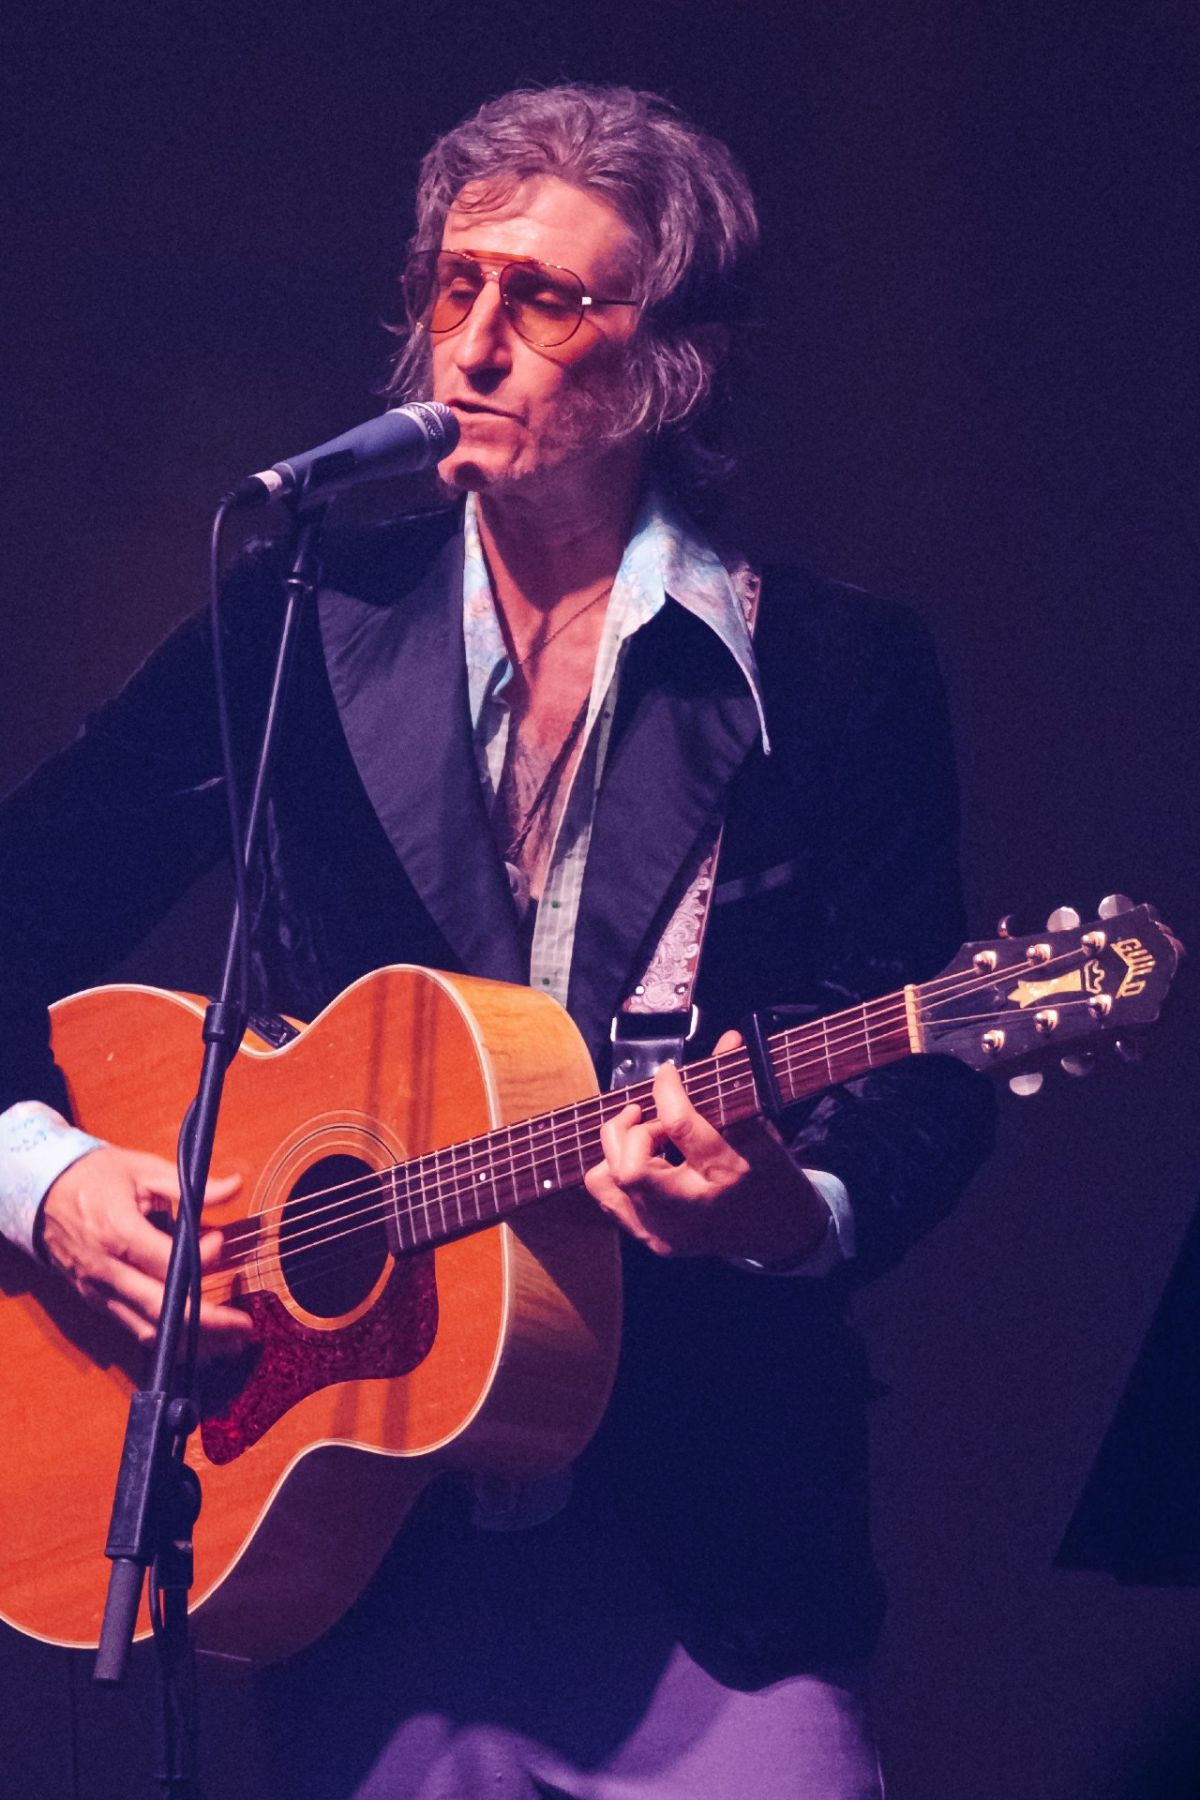 One of Australia’s best indie-rock artists – Tim Rogers (You Am I) playing his guitar